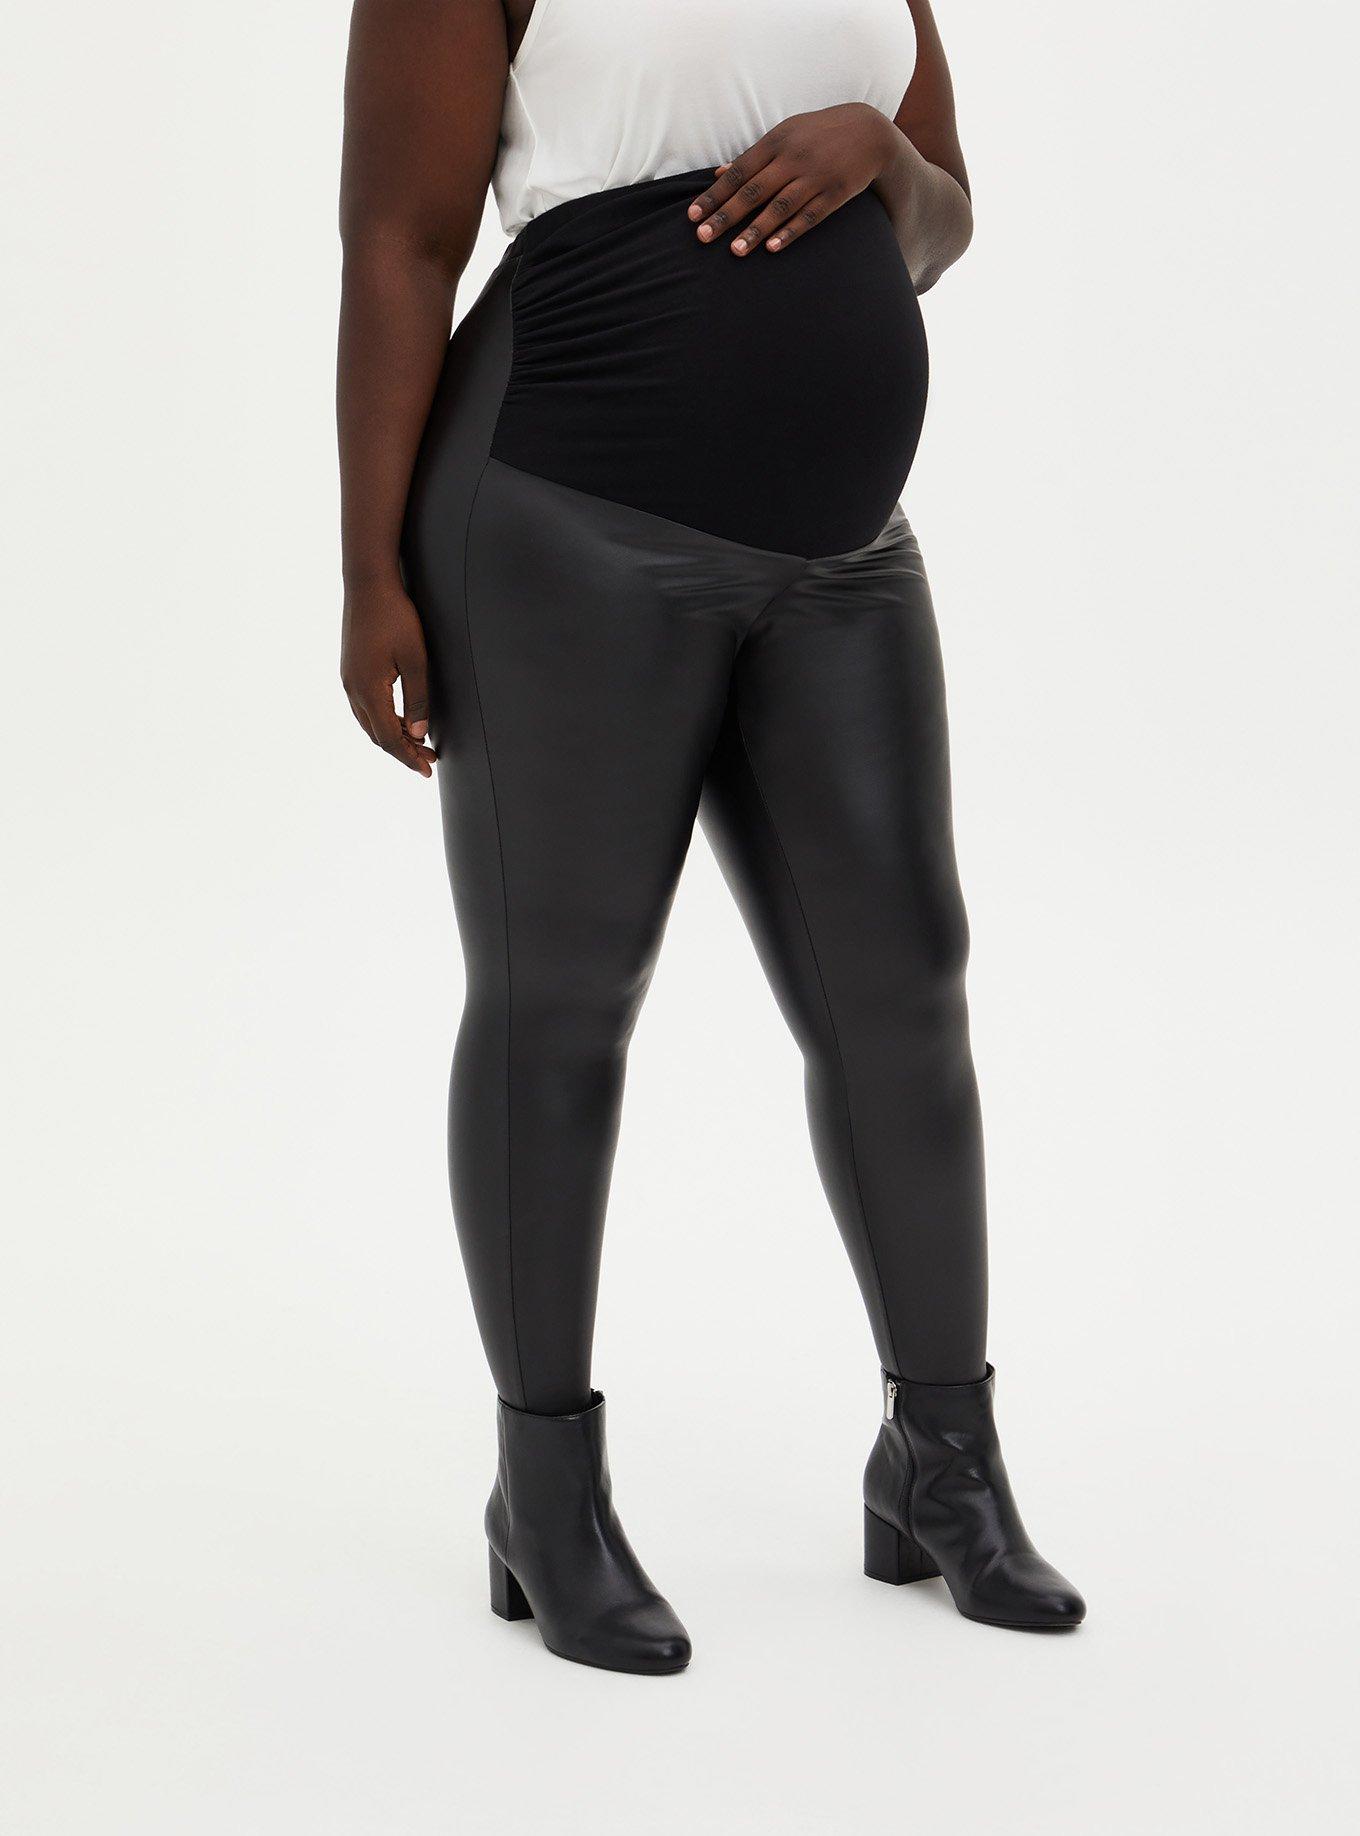  Spanx Maternity Leggings Faux Leather